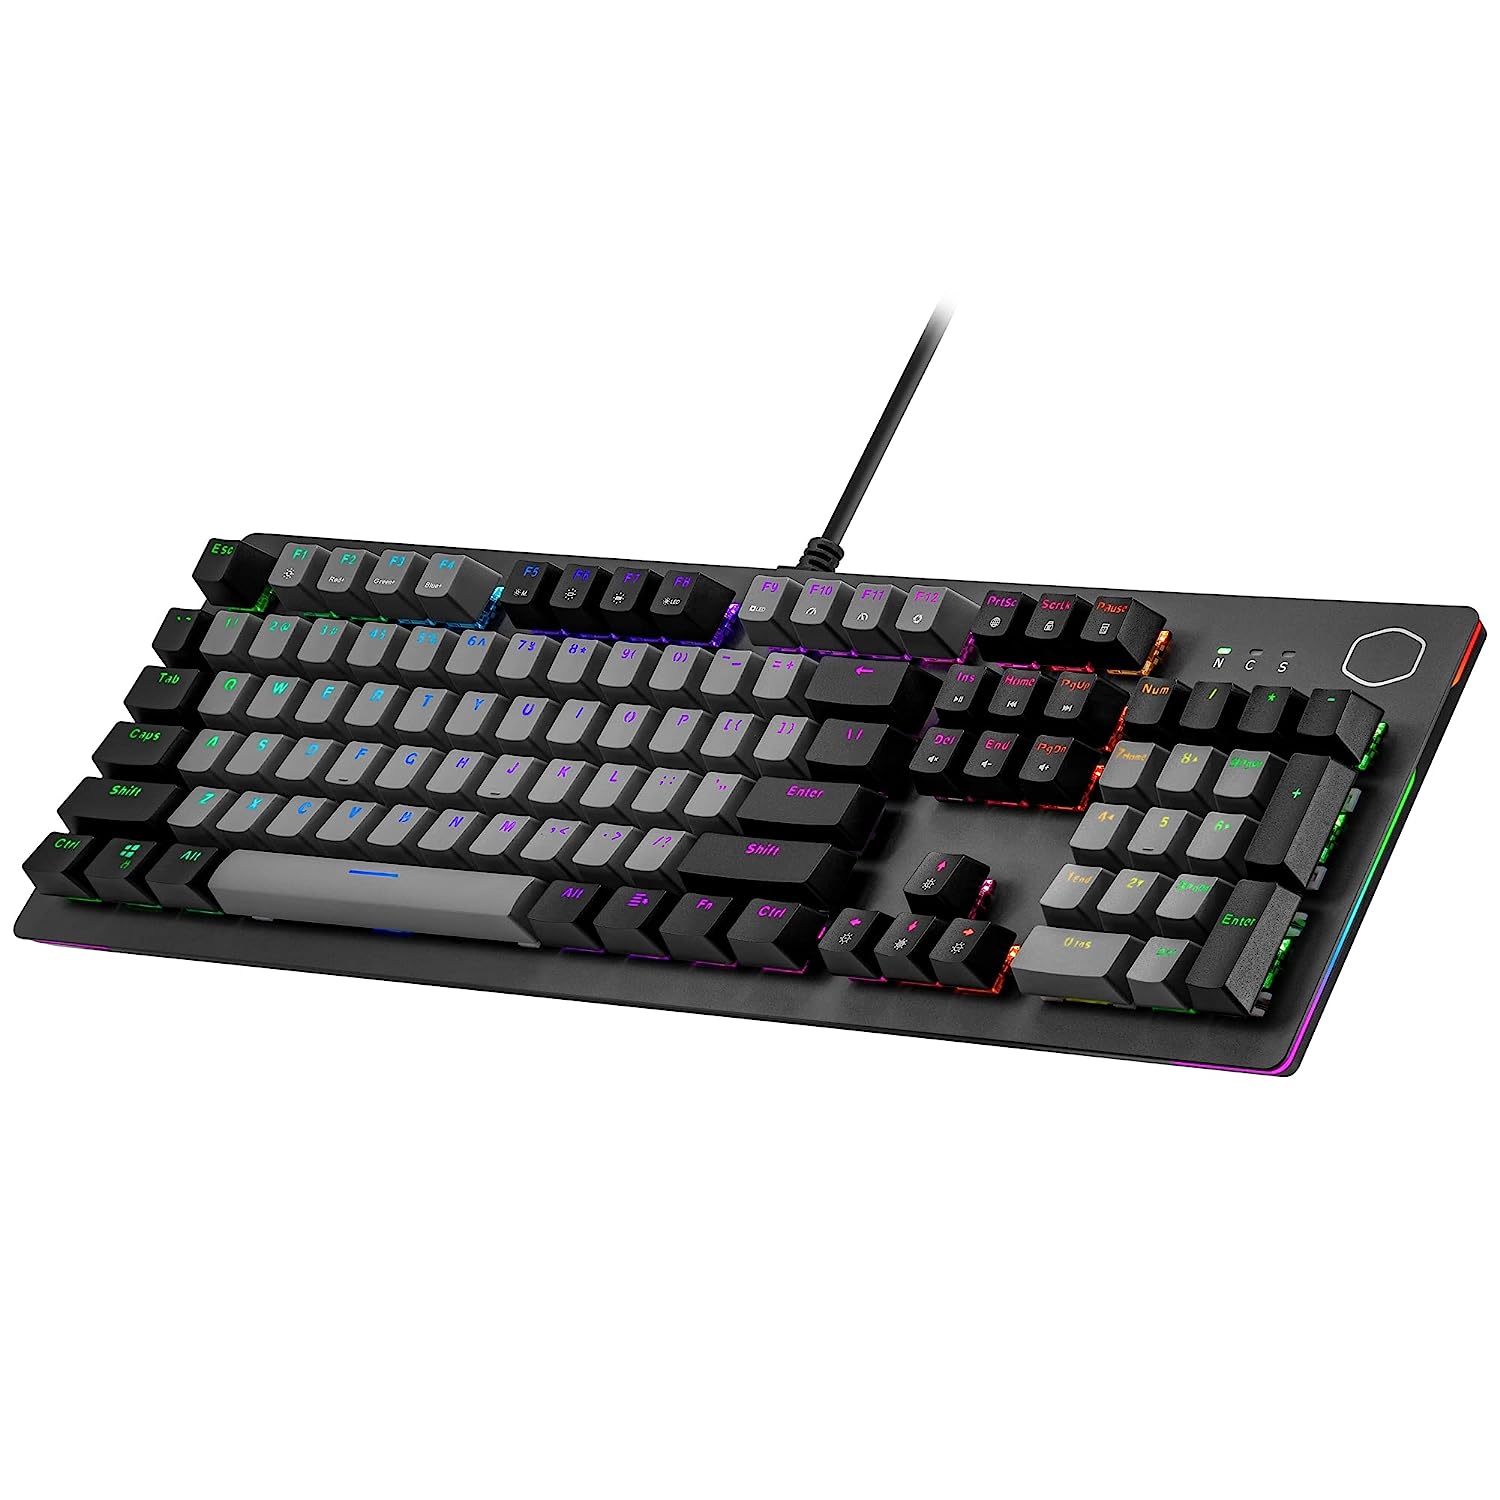 Cooler Master CK352 Gaming Mechanical Keyboard Blue Switch with RGB Backlighting